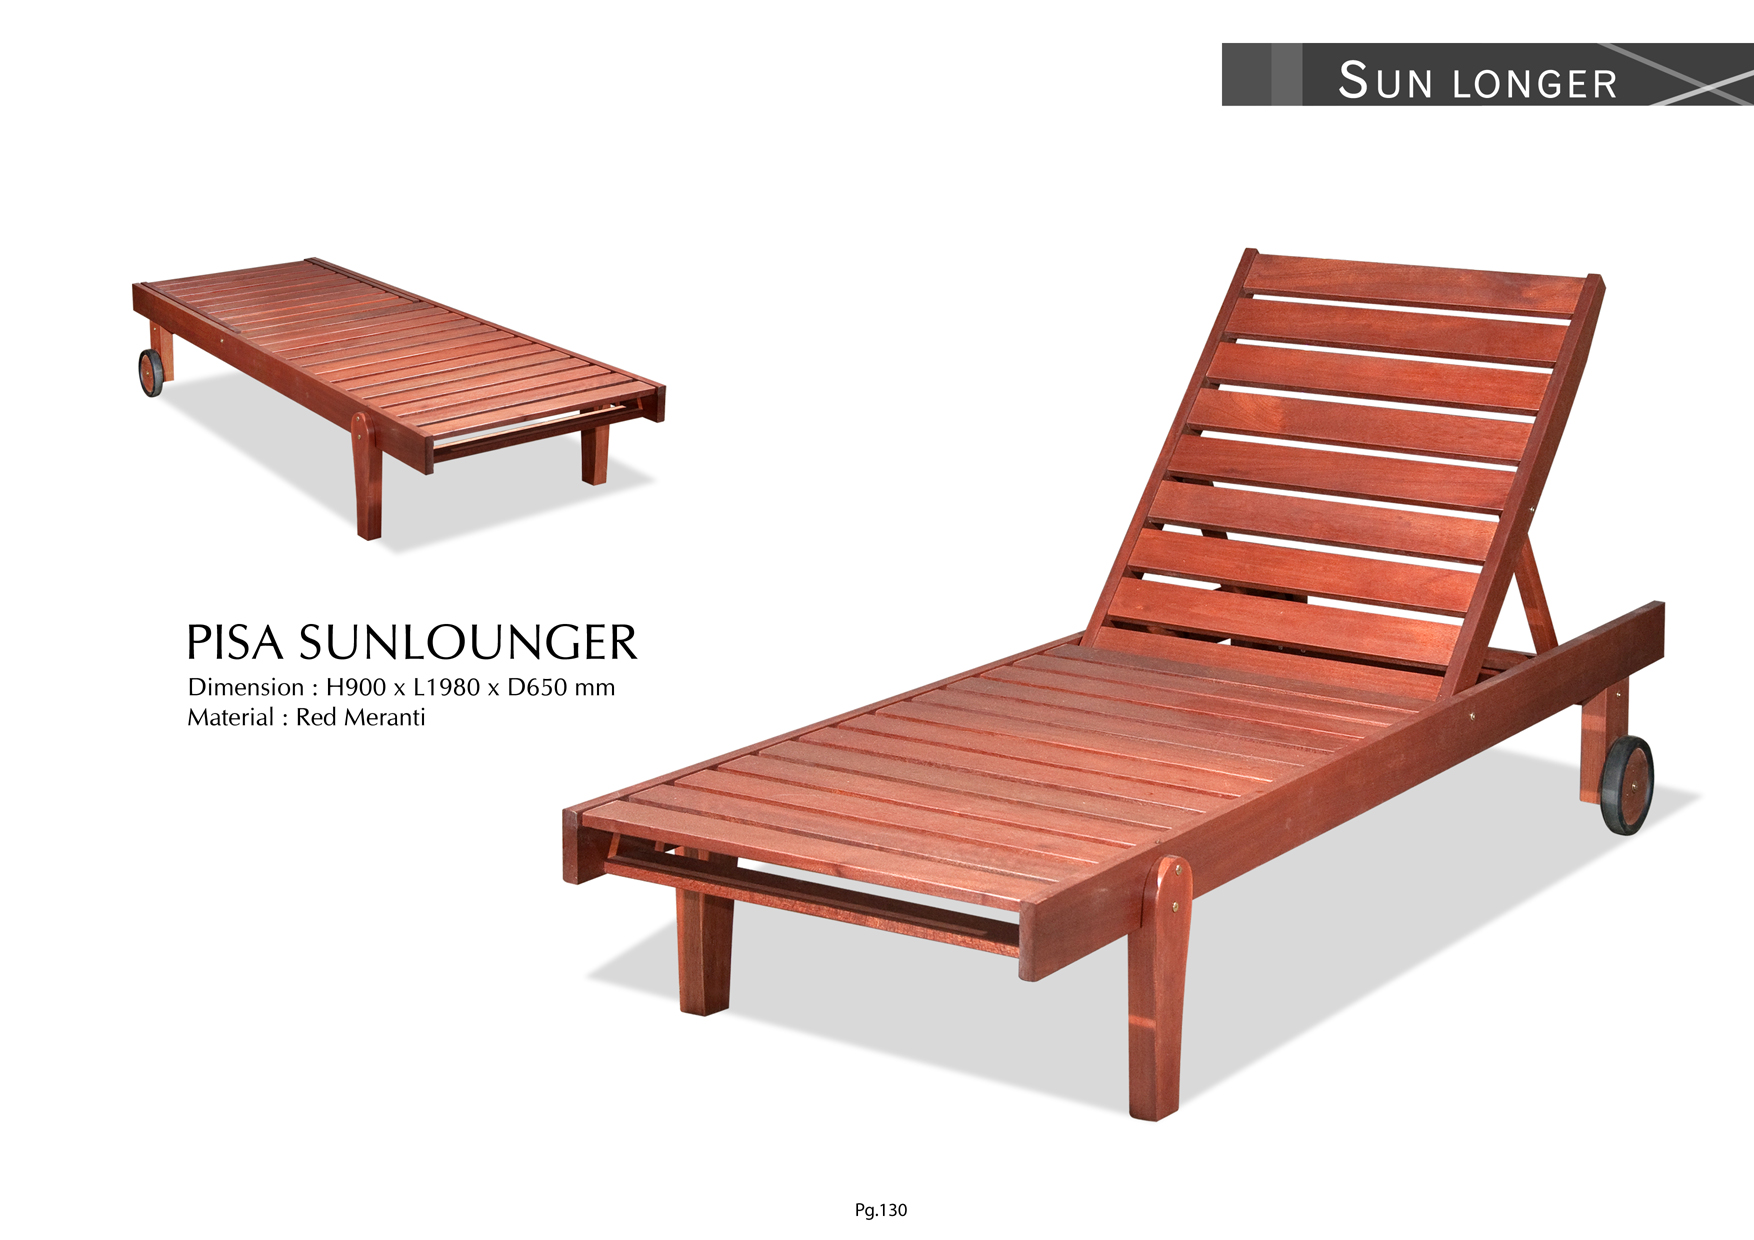 Product: PG130. PISA SUNLOUNGER